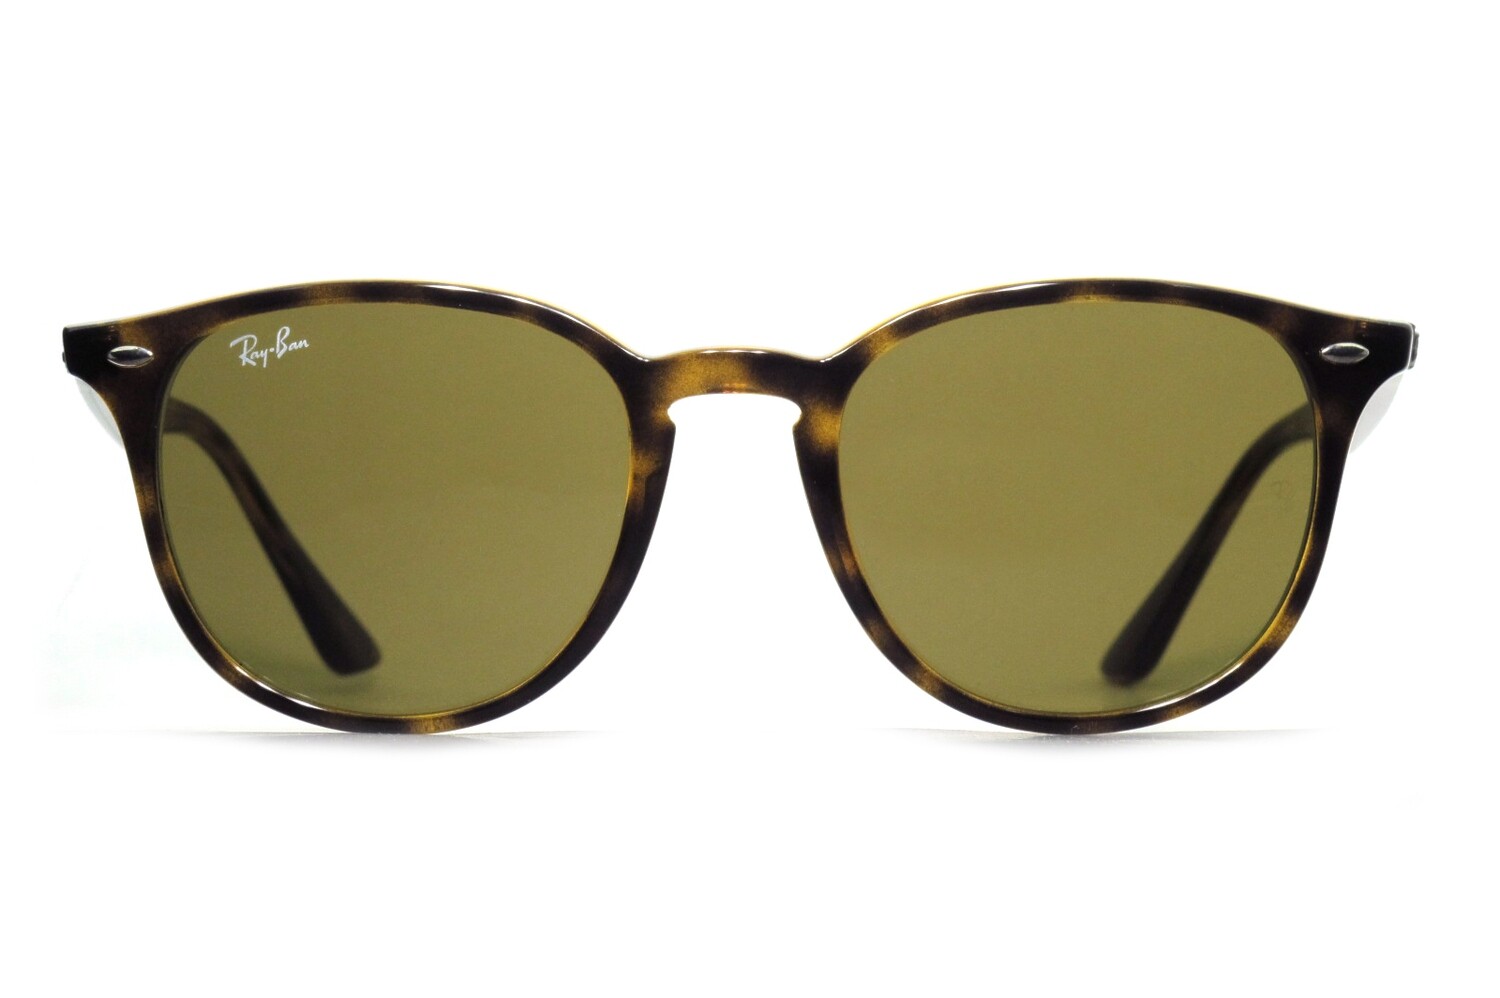 4259 by Ray Ban